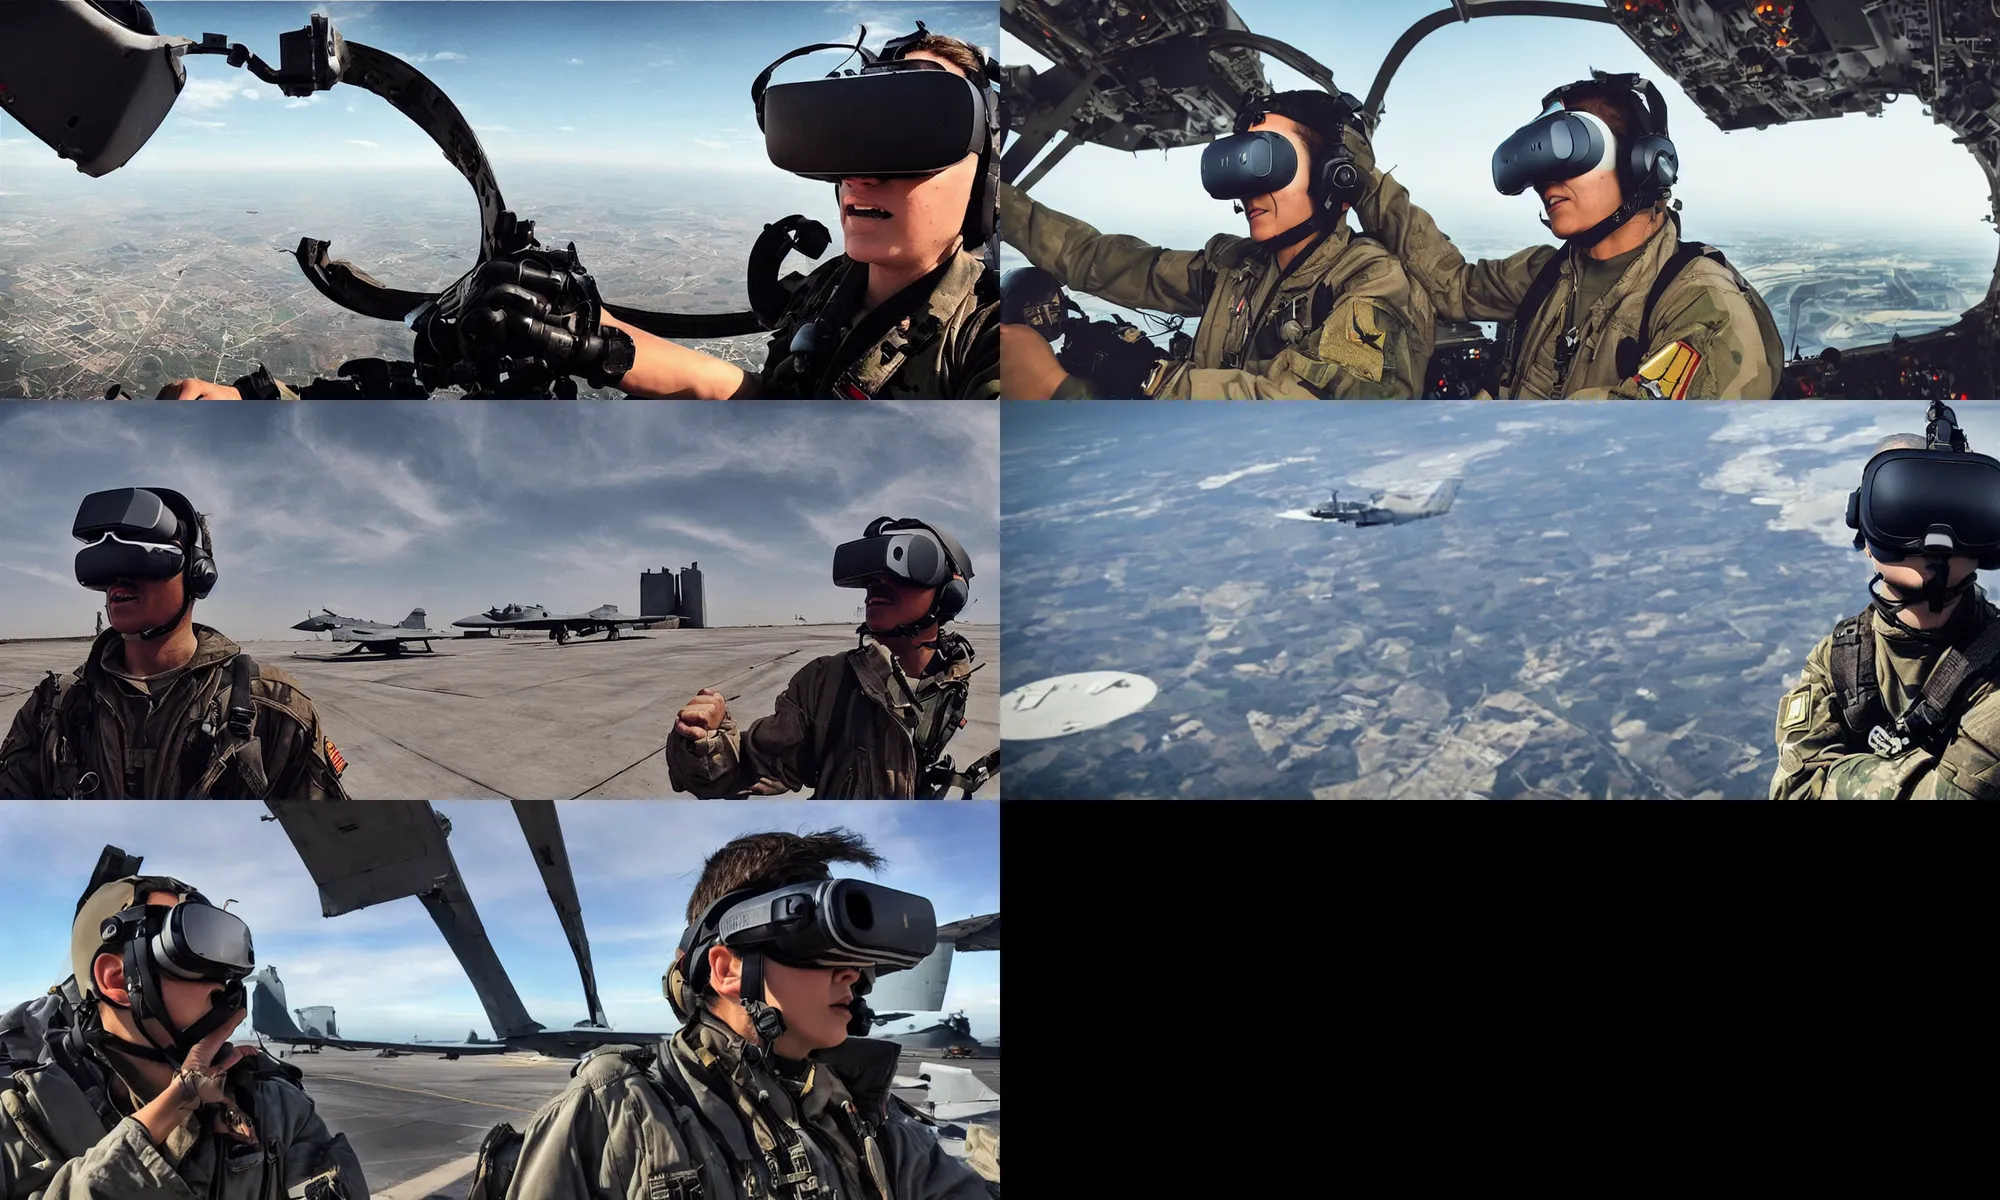 Prompt: “Fighter pilot wearing a VR headset climbing down from a military combat airplane while a busy airbase is shown in the background, gritty, cinematic wide angle, dark tones.”